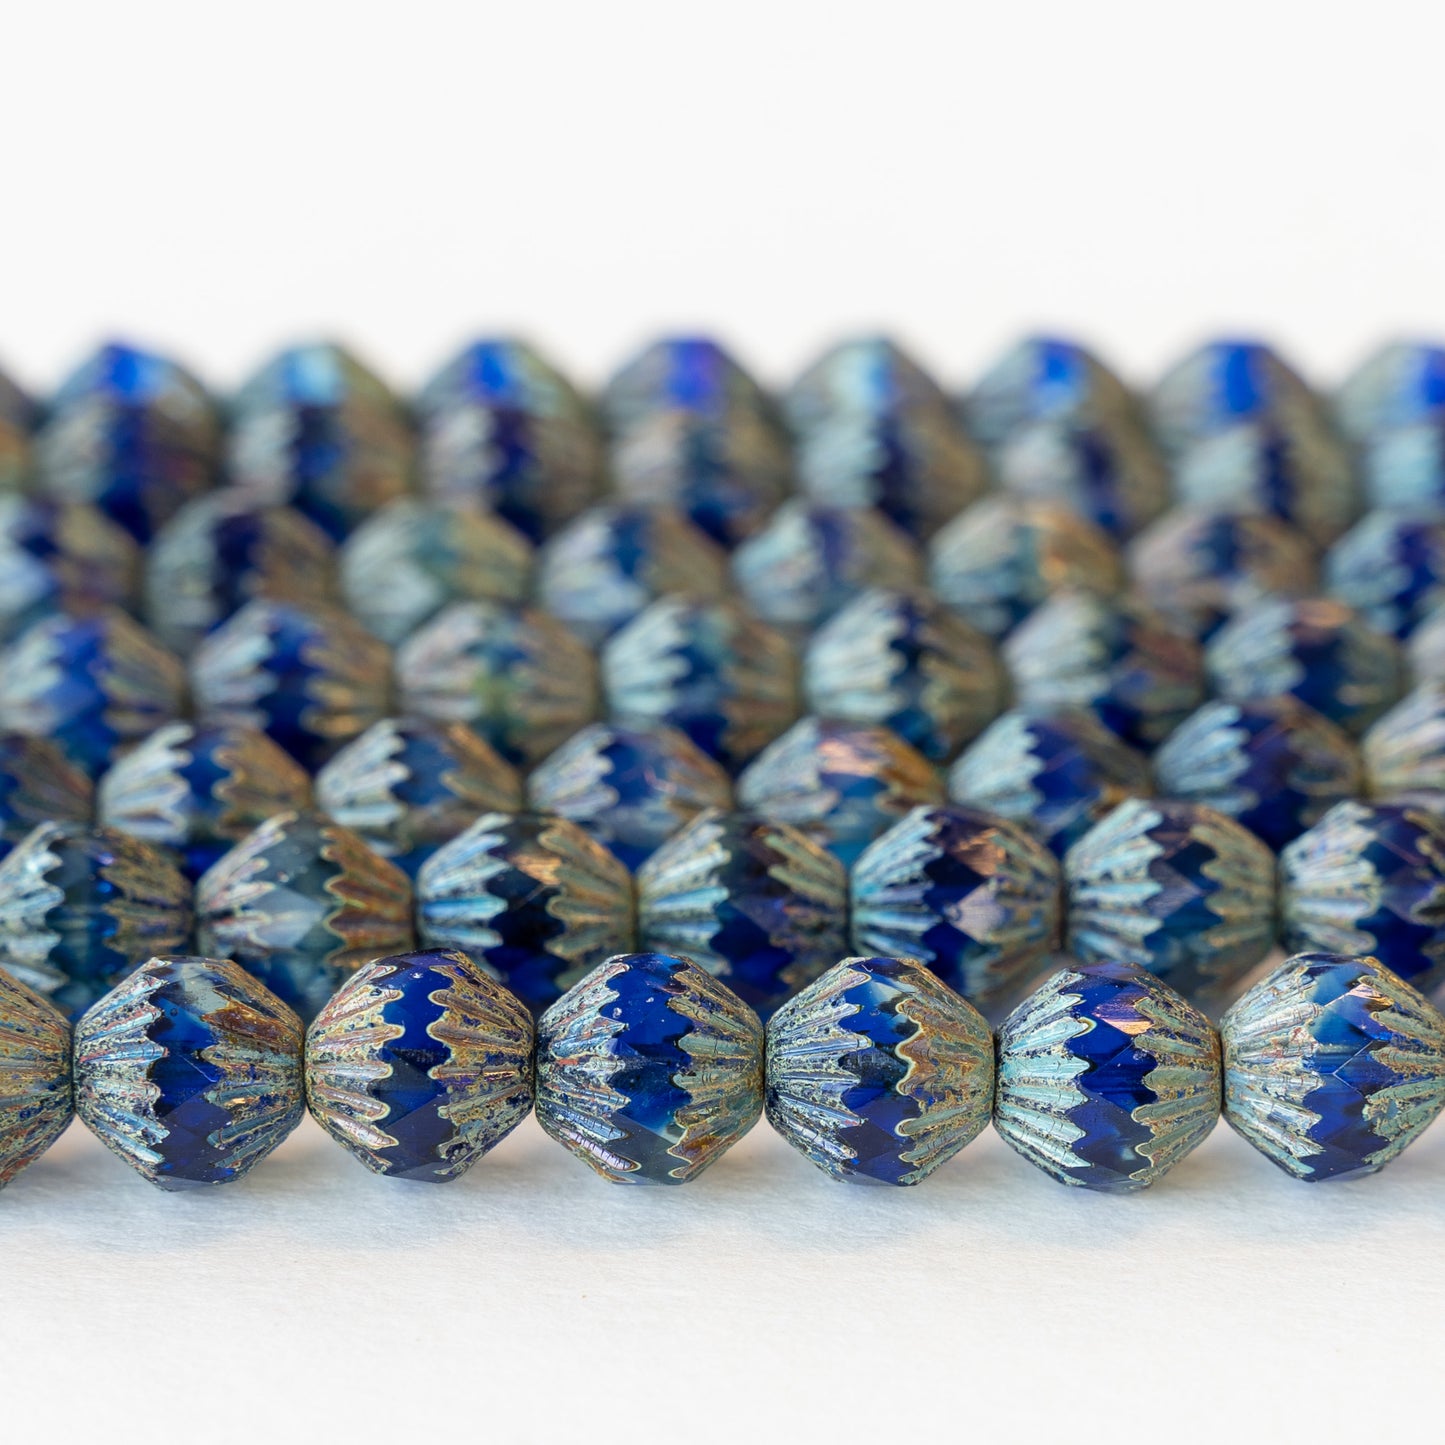 11mm Glass Bicone Beads - Blue with Picasso Finish - 12 Beads